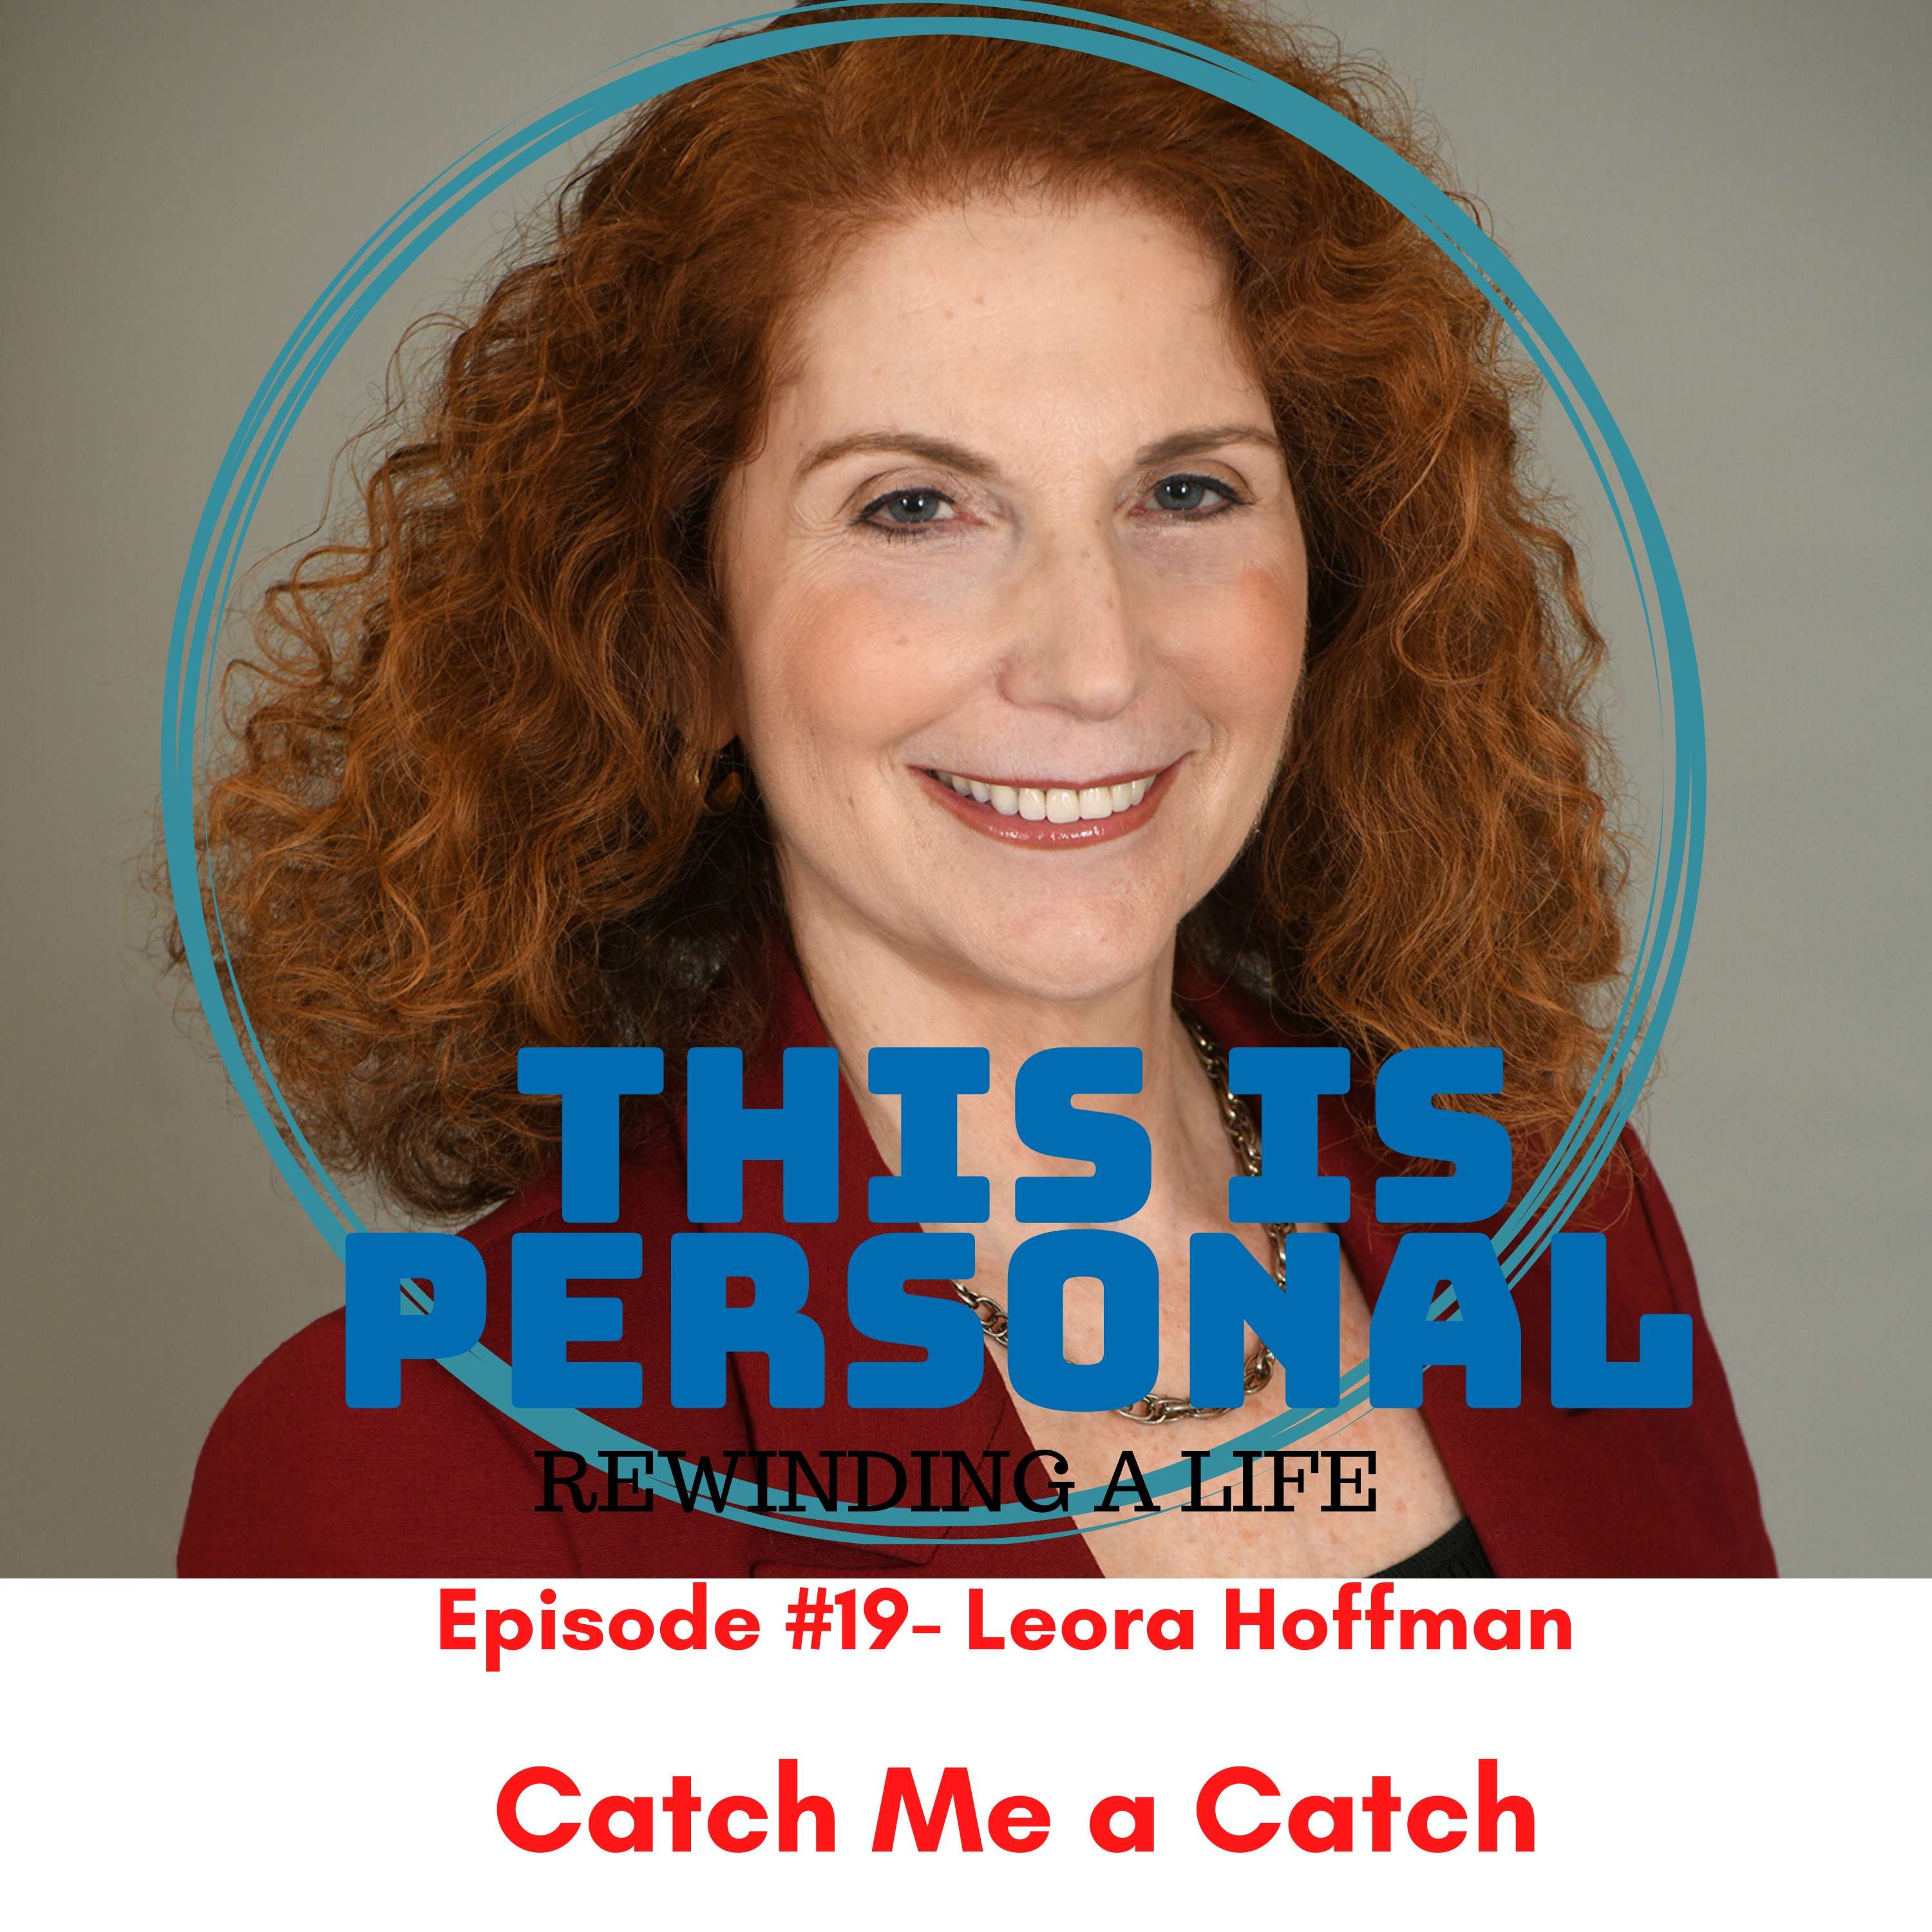 Catch Me a Catch: Chronicles of a Matchmaker with Leora Hoffman